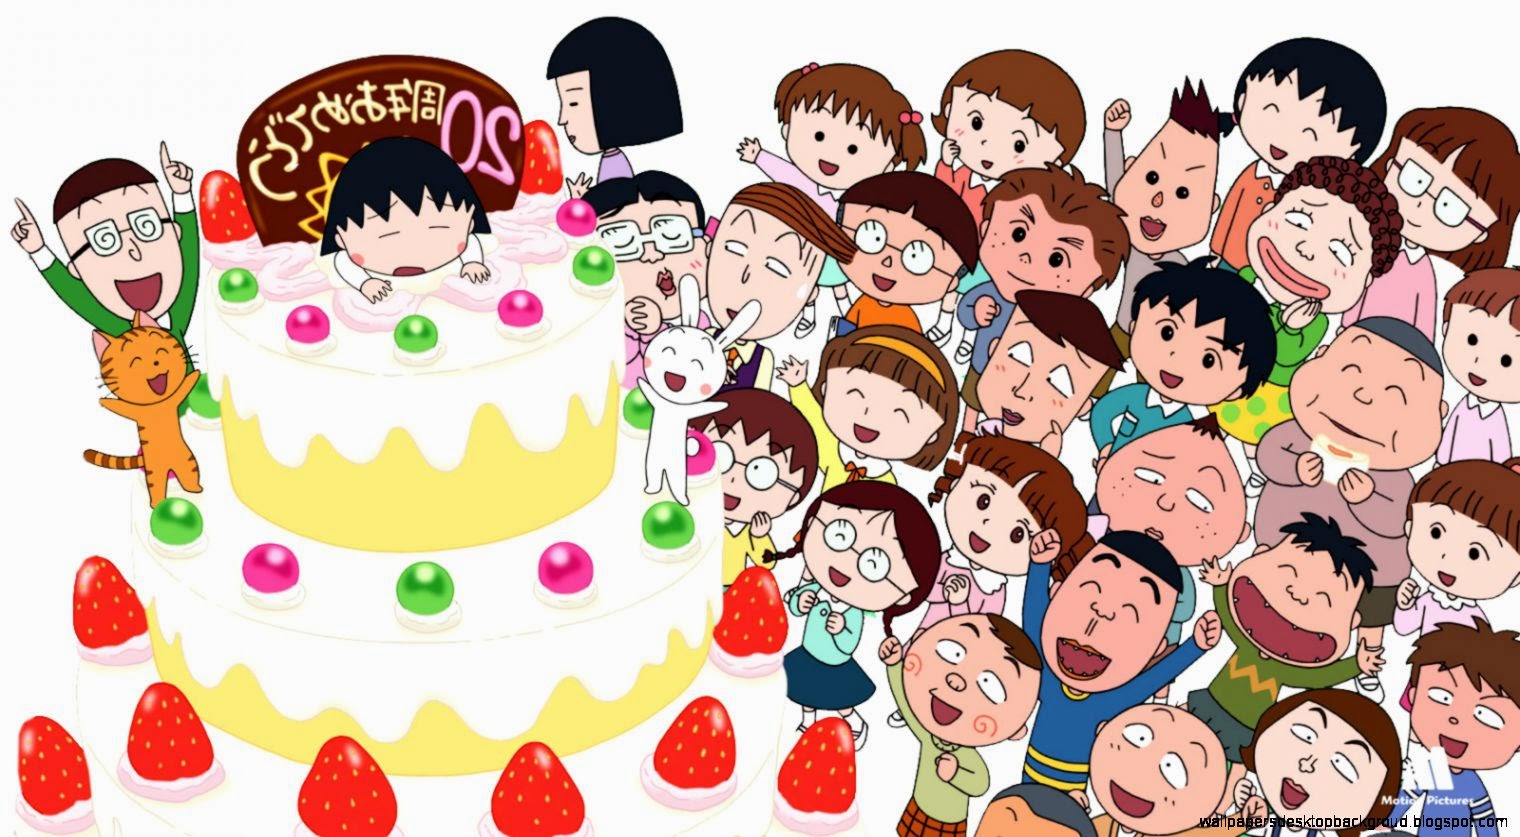 Pictures gallery of Chibi Maruko Chan | MotionKIDS-tv. Fun for kids,  cartoon, games, downloads and activities